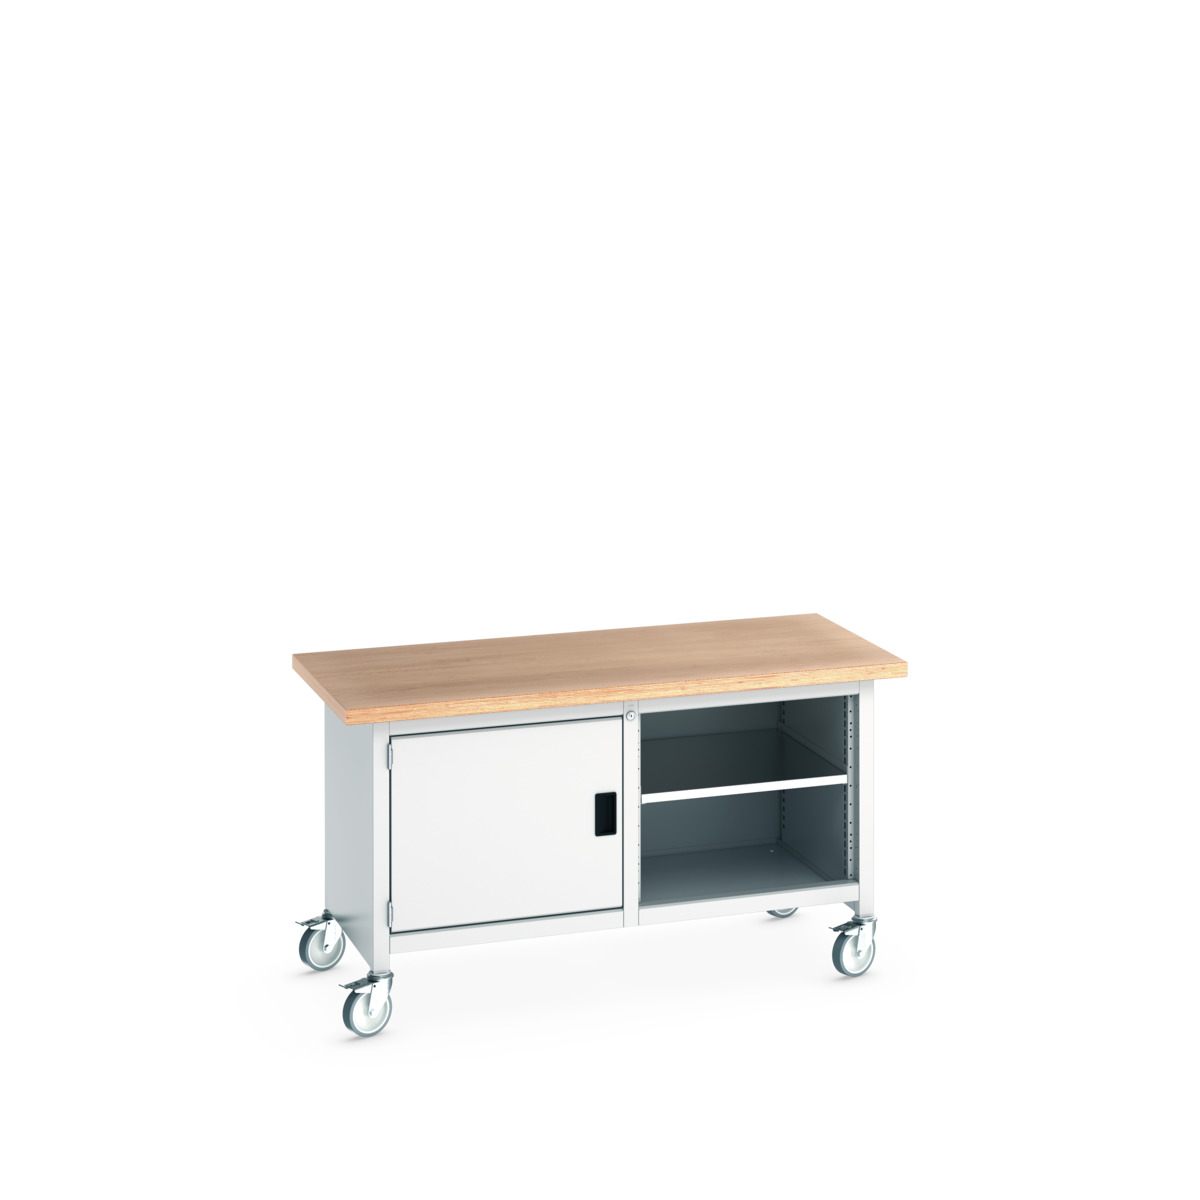 41002094.16V - cubio mobile storage bench (mpx)